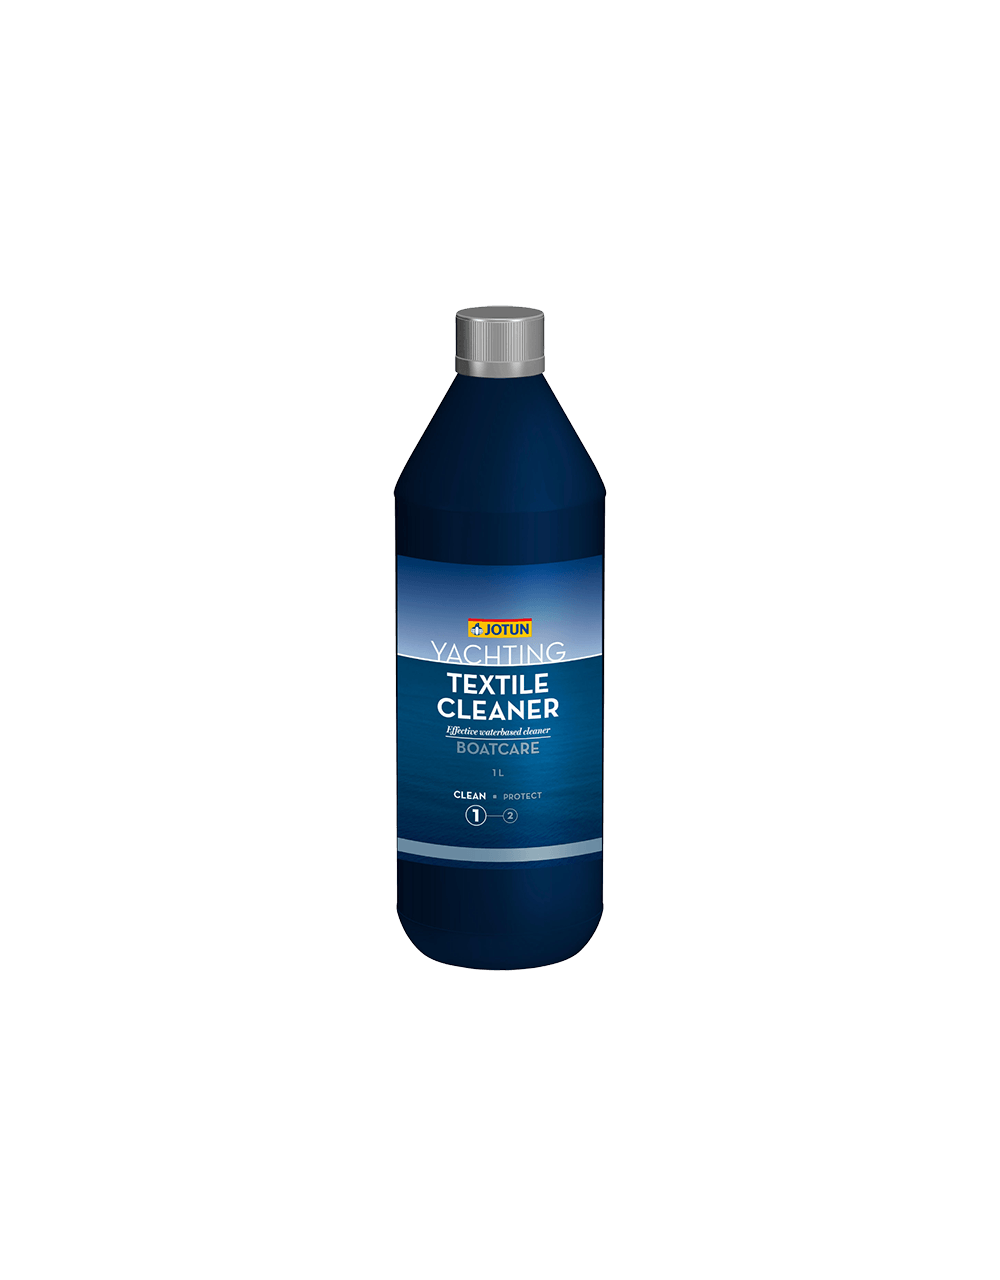 Jotun Yachting Textile Cleaner